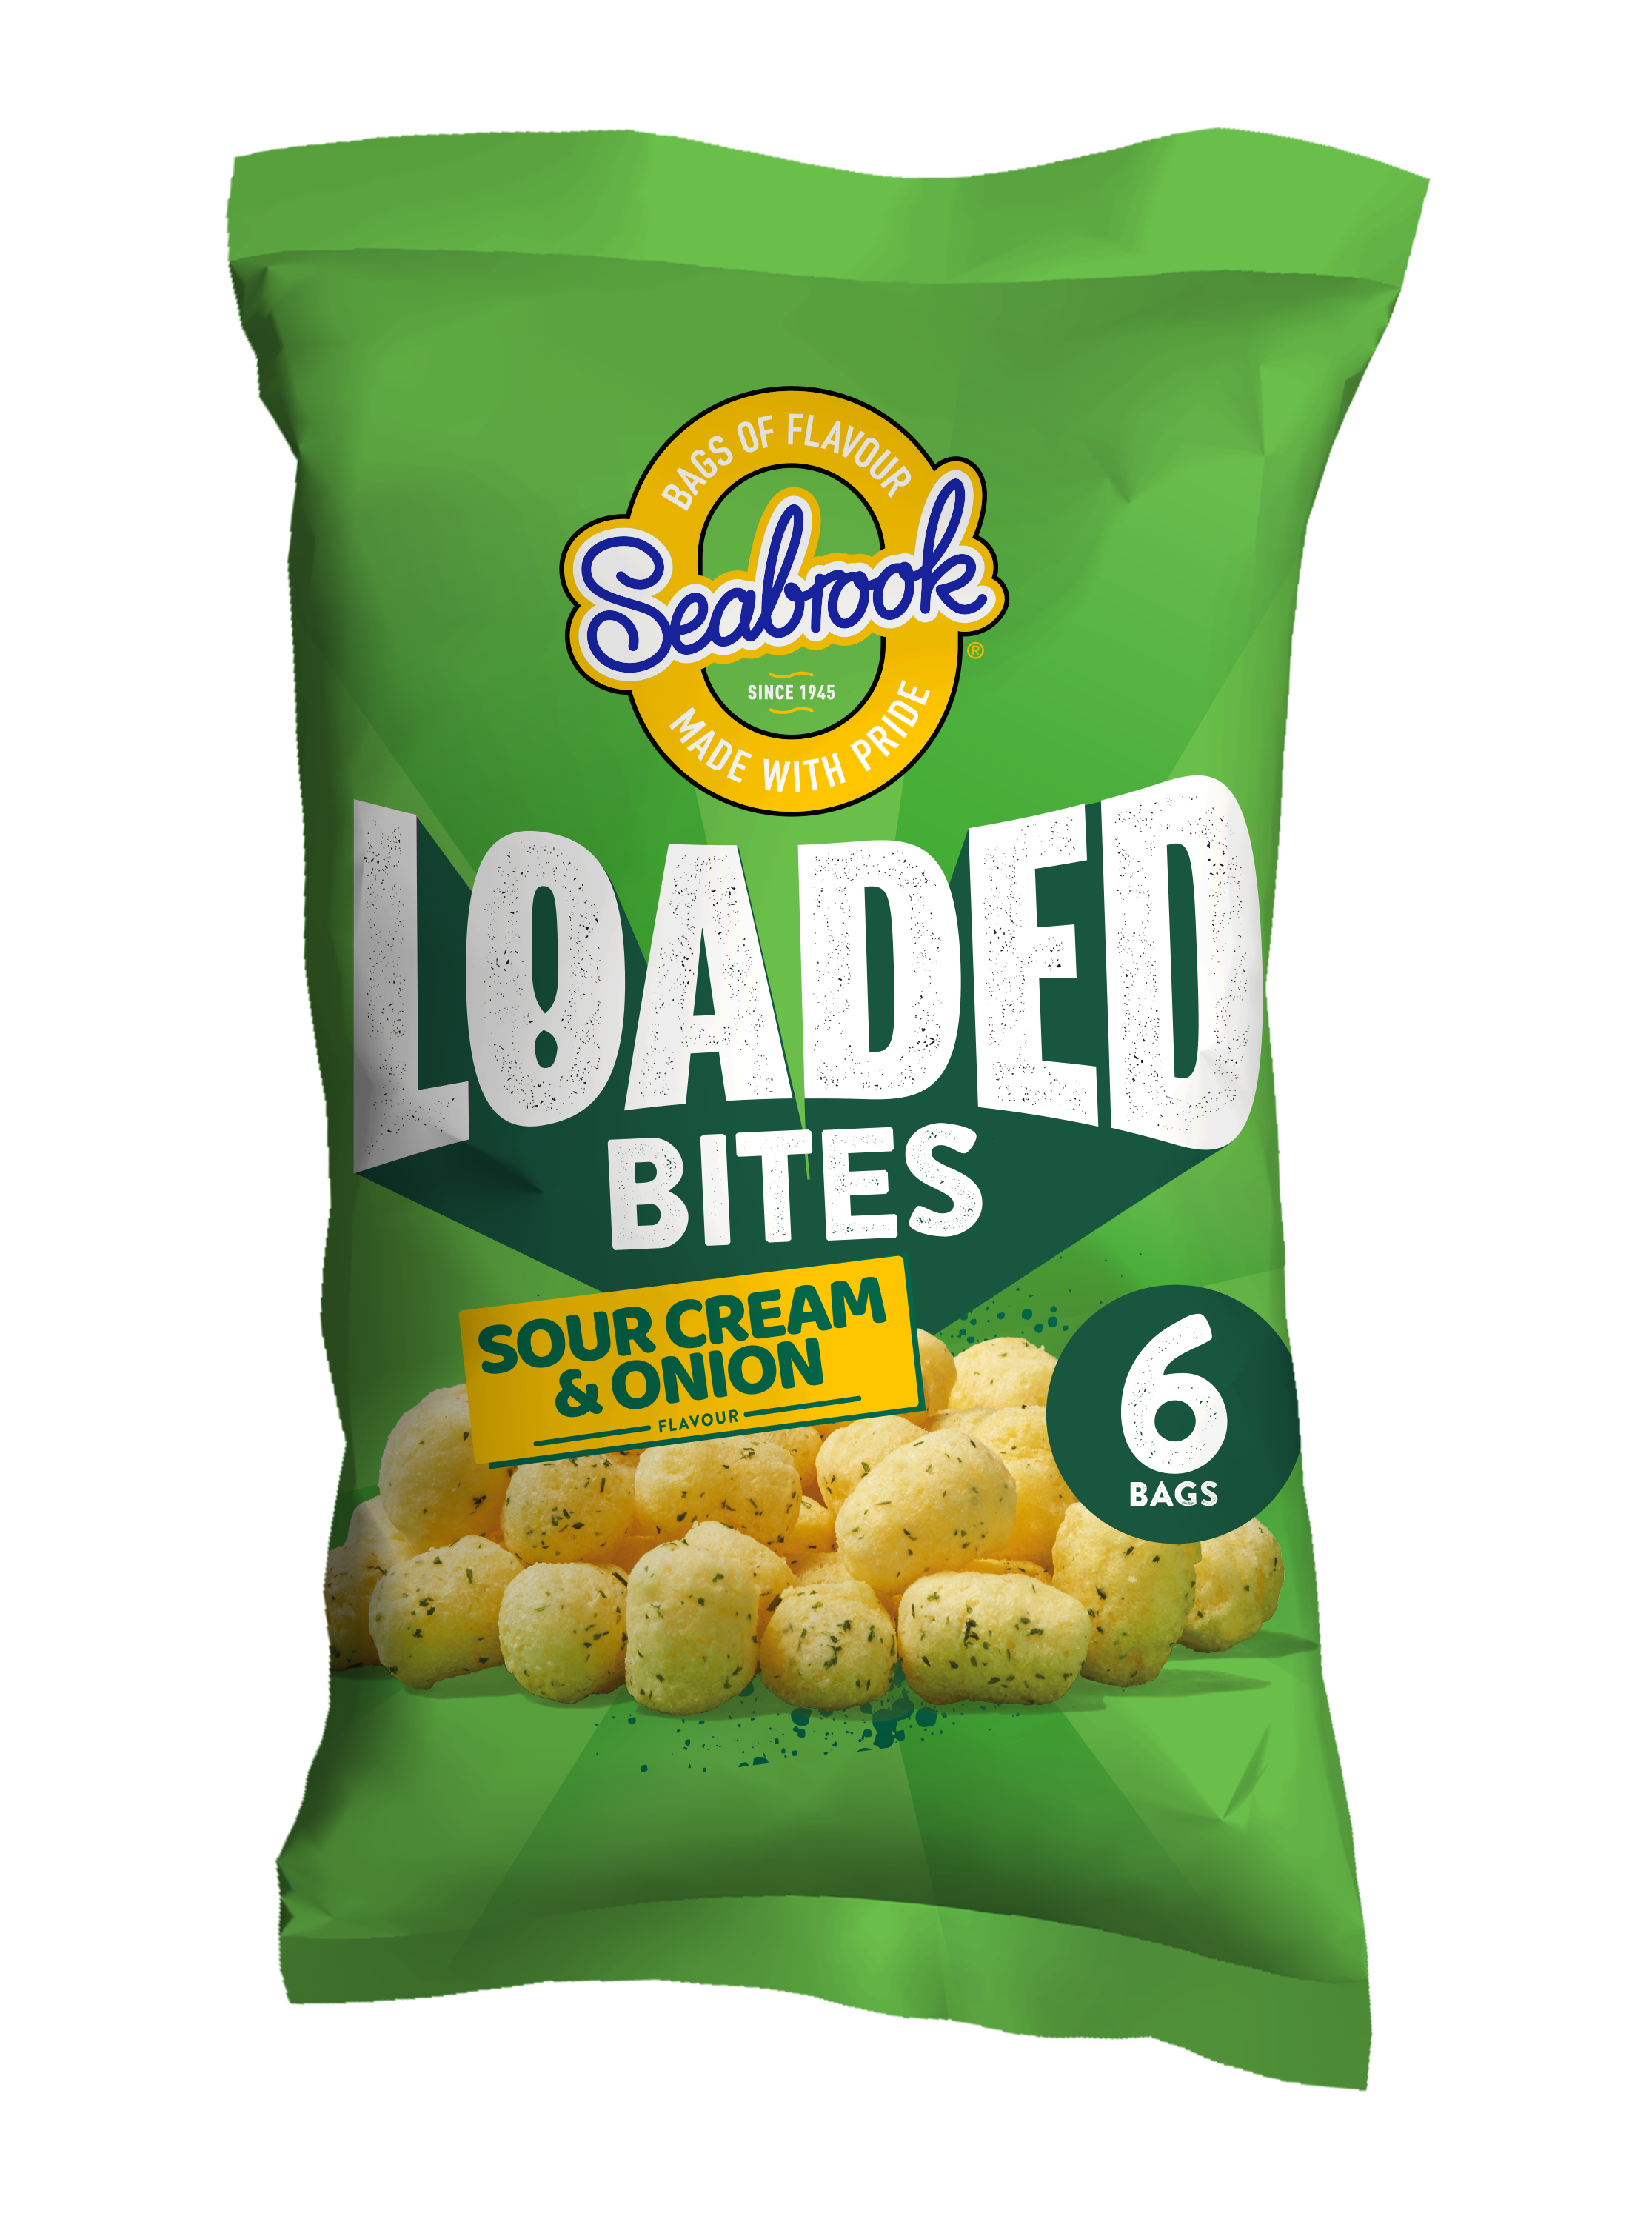 Calbee UK expands Loaded range under the Seabrook brand